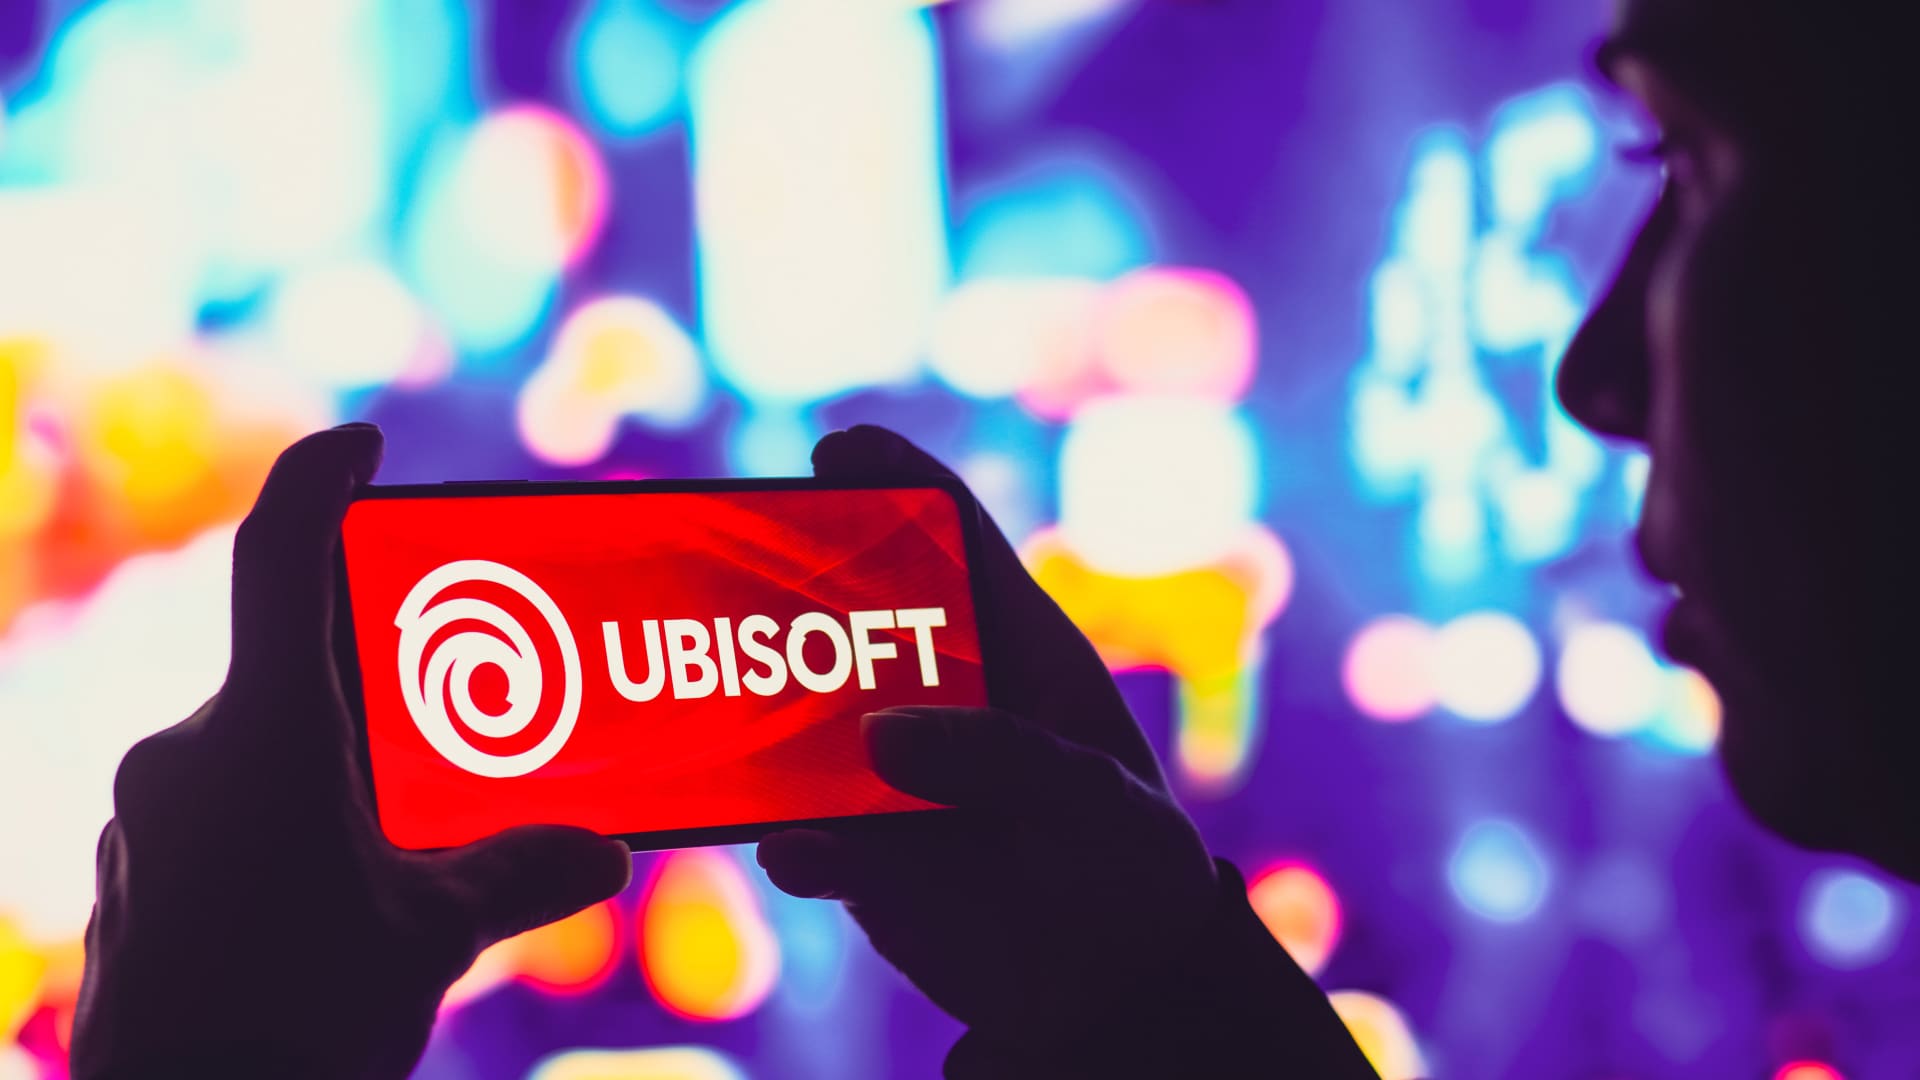 Ubisoft cancels three games, lowers targets in worsening circumstances